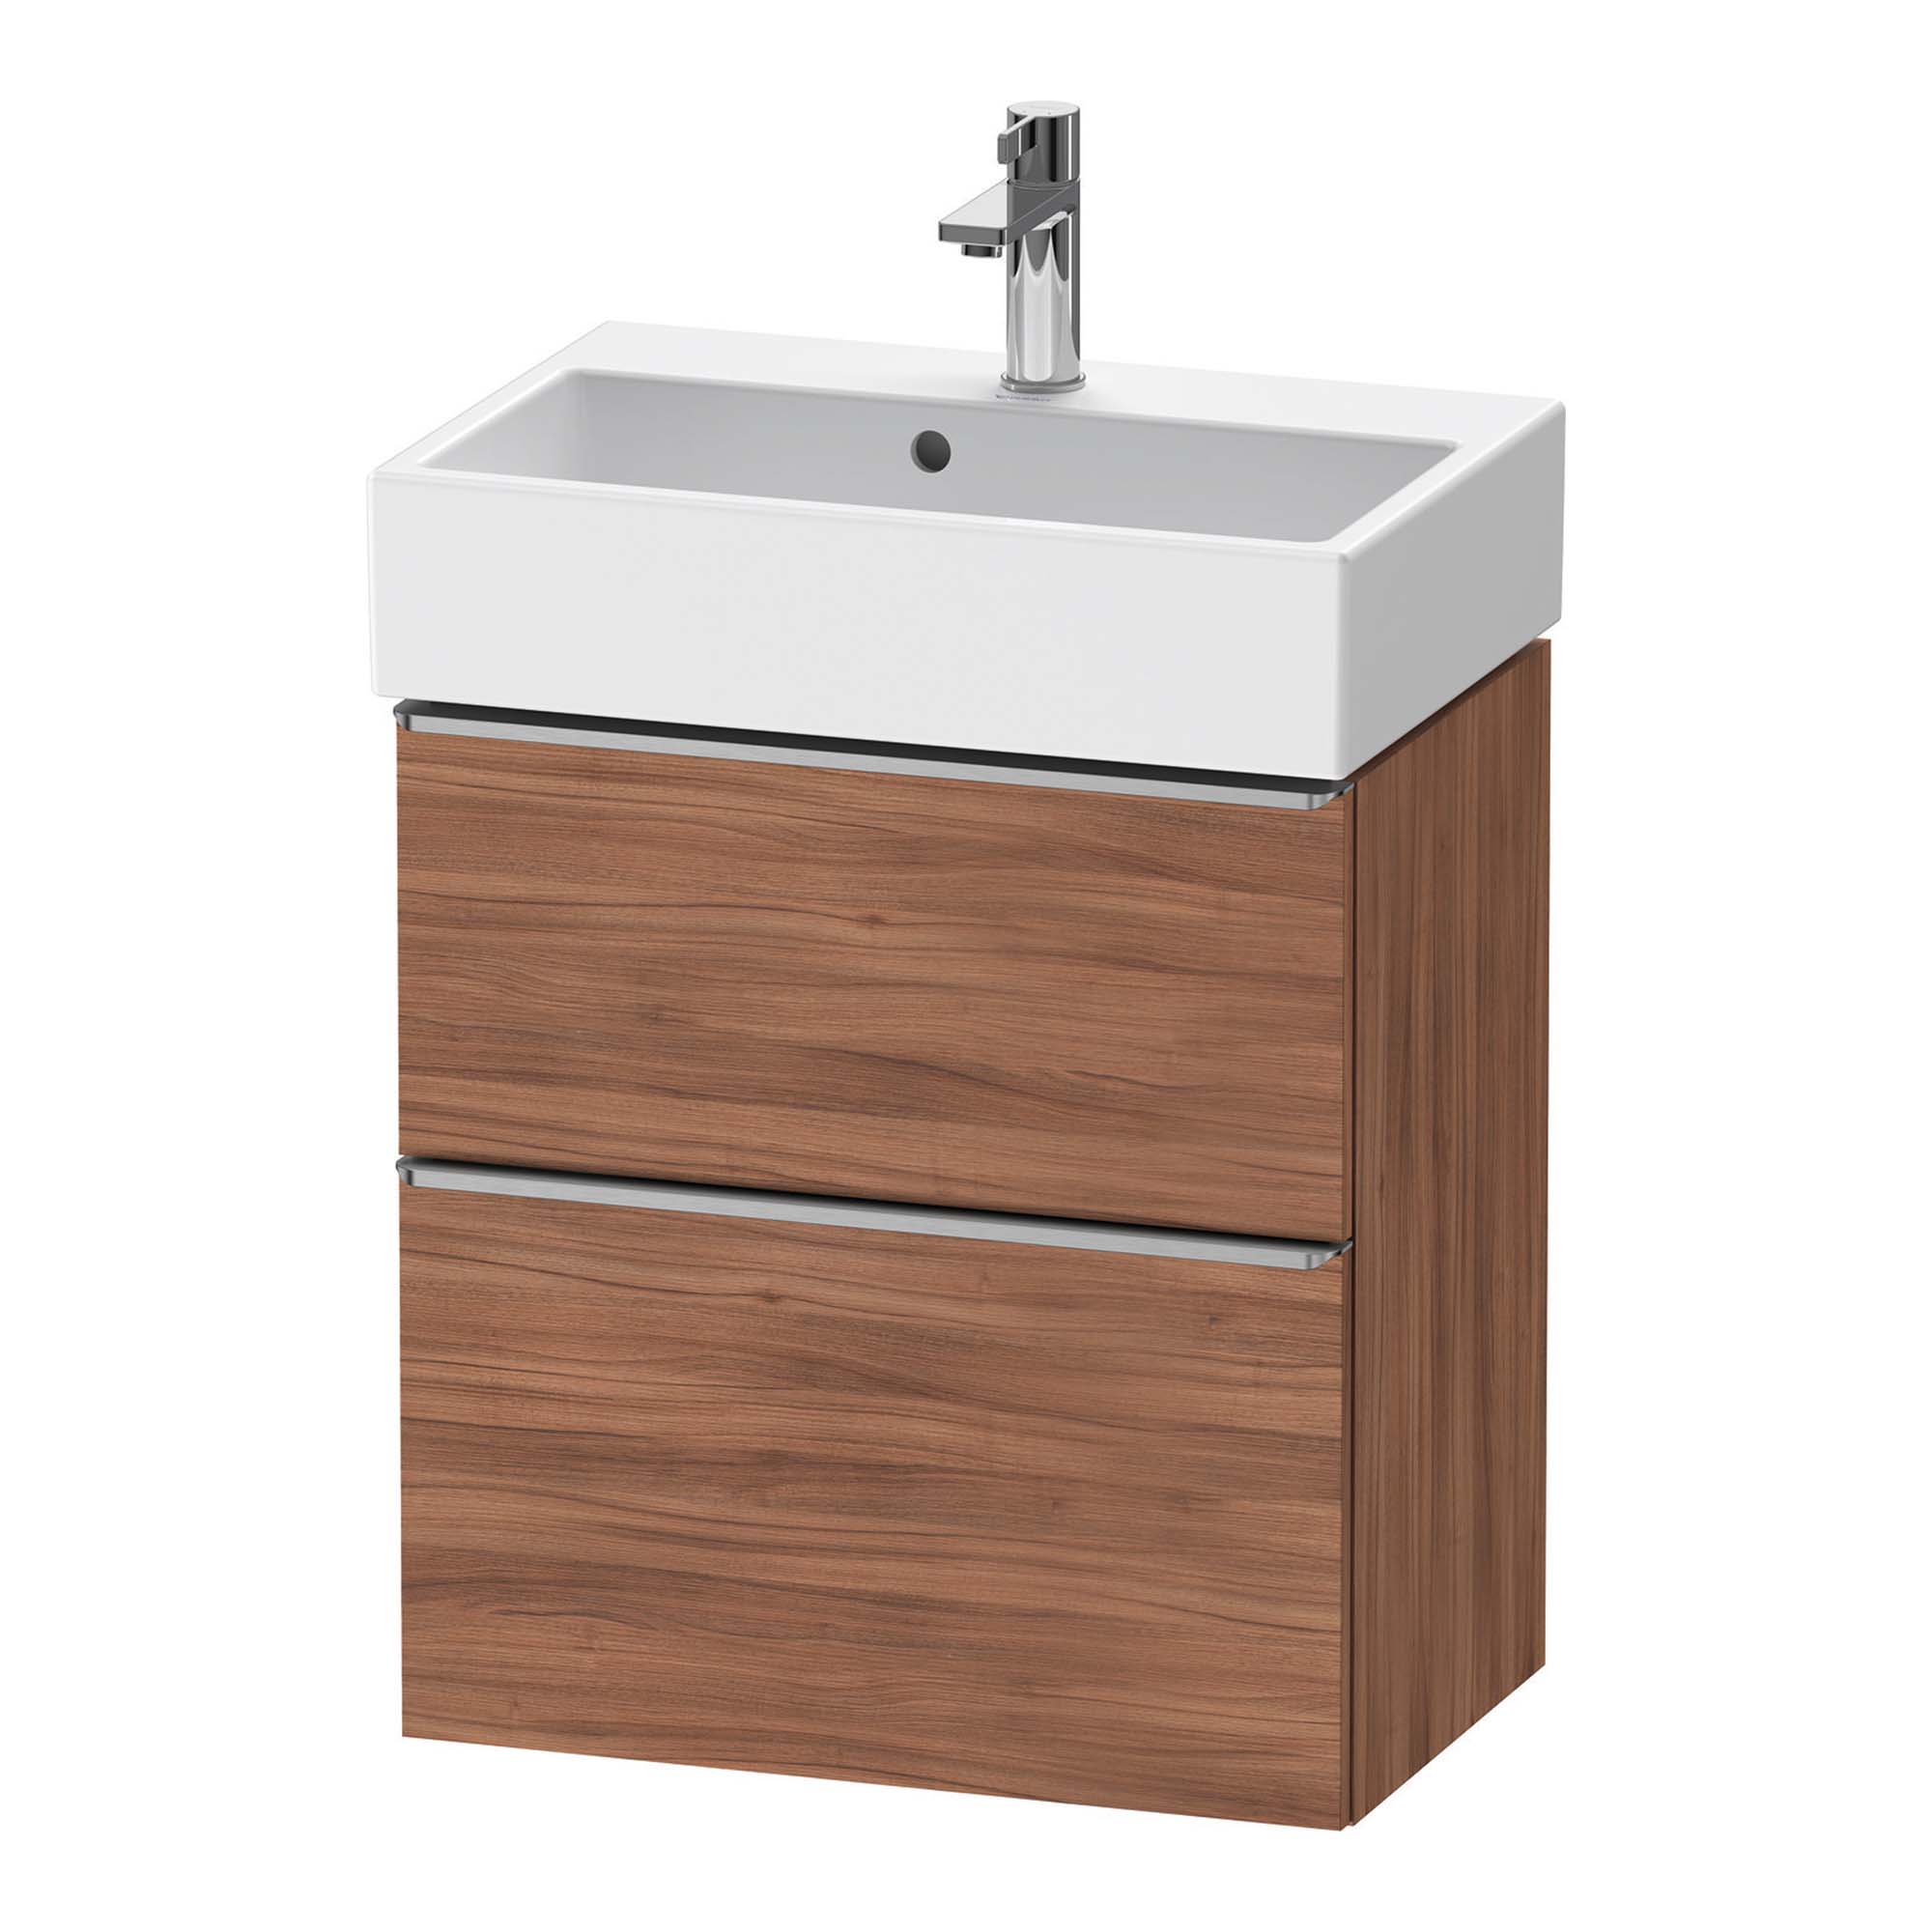 duravit d-neo 600 wall mounted vanity unit with vero basin walnut stainless steel handles